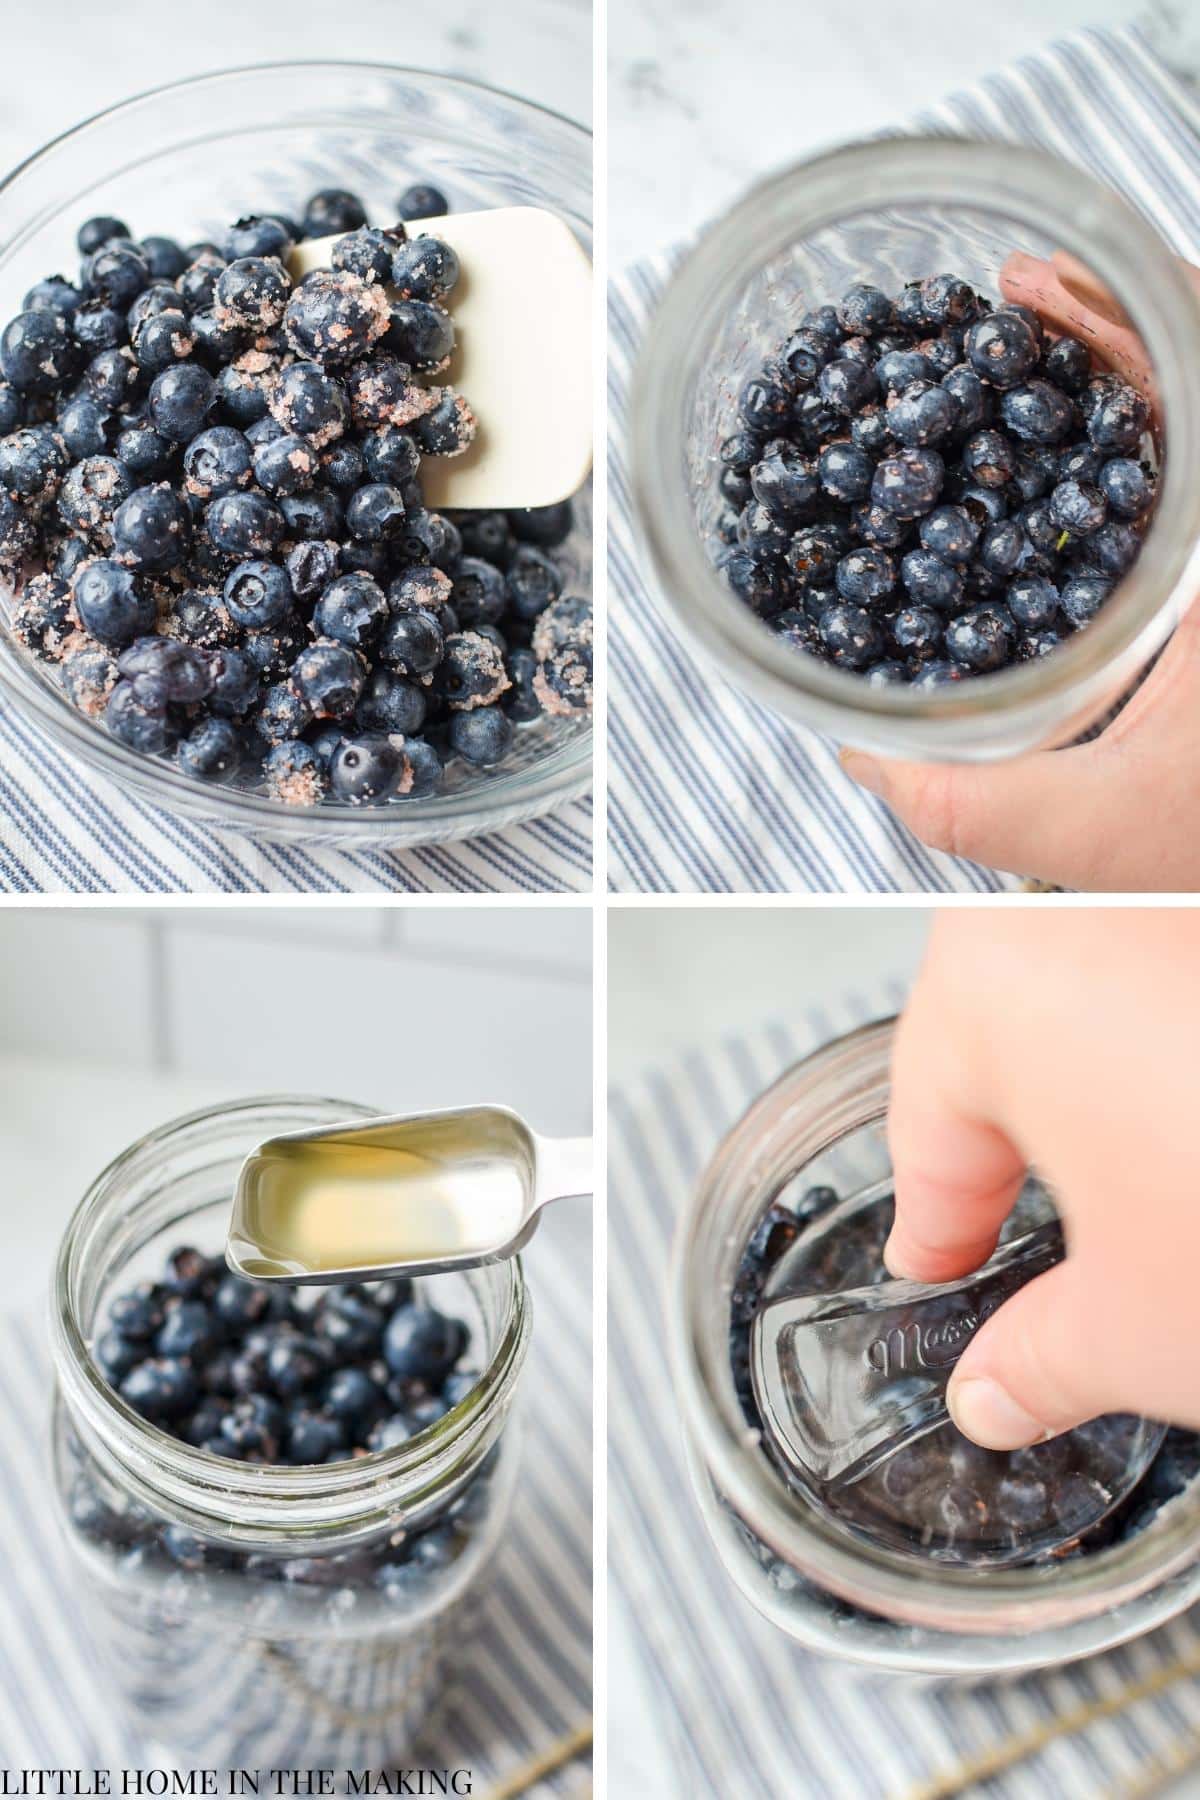 Adding salt and starter culture to blueberries.